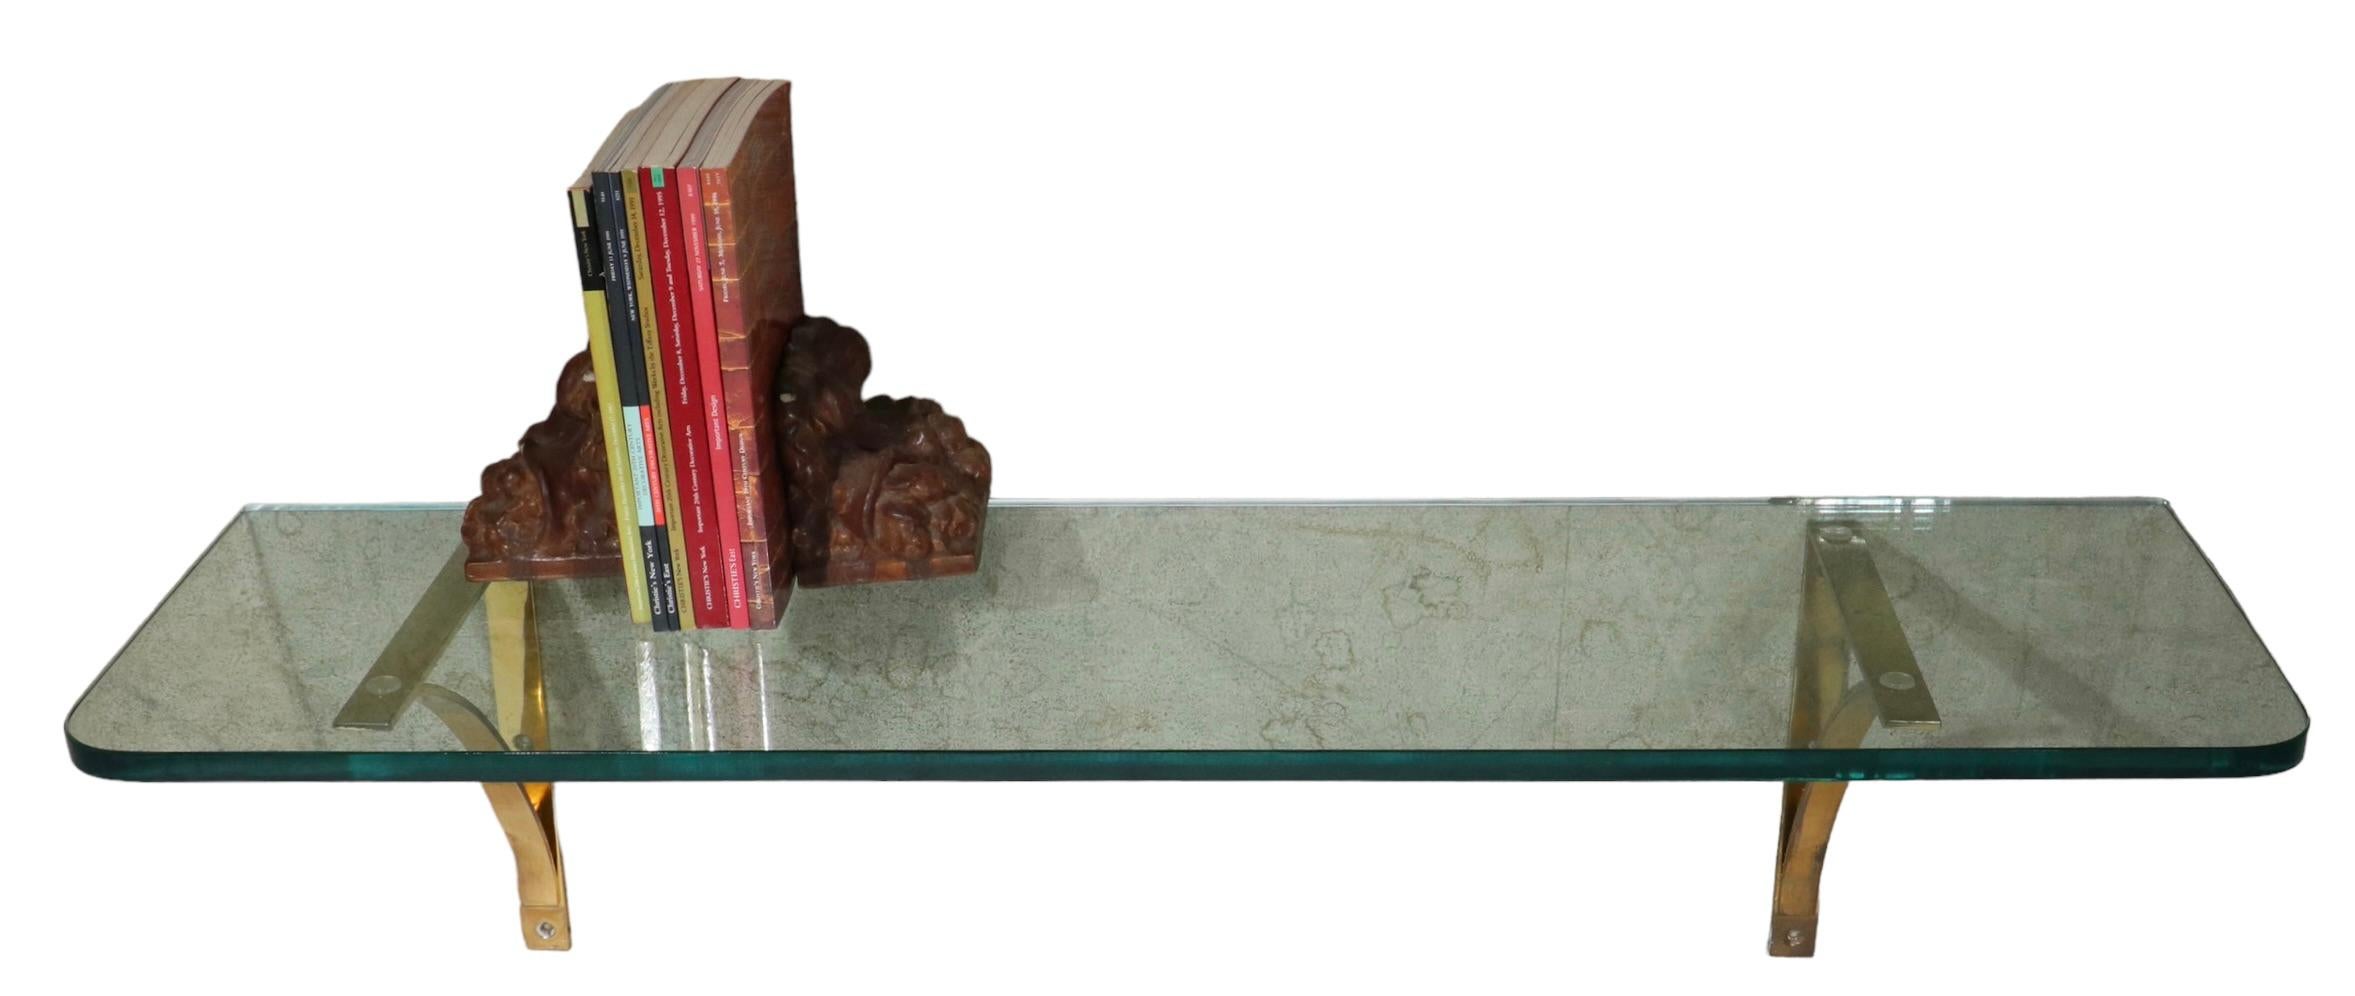 Post Modern Plate Glass and Brass Wall Mount Shelf, C. 1970's For Sale 11